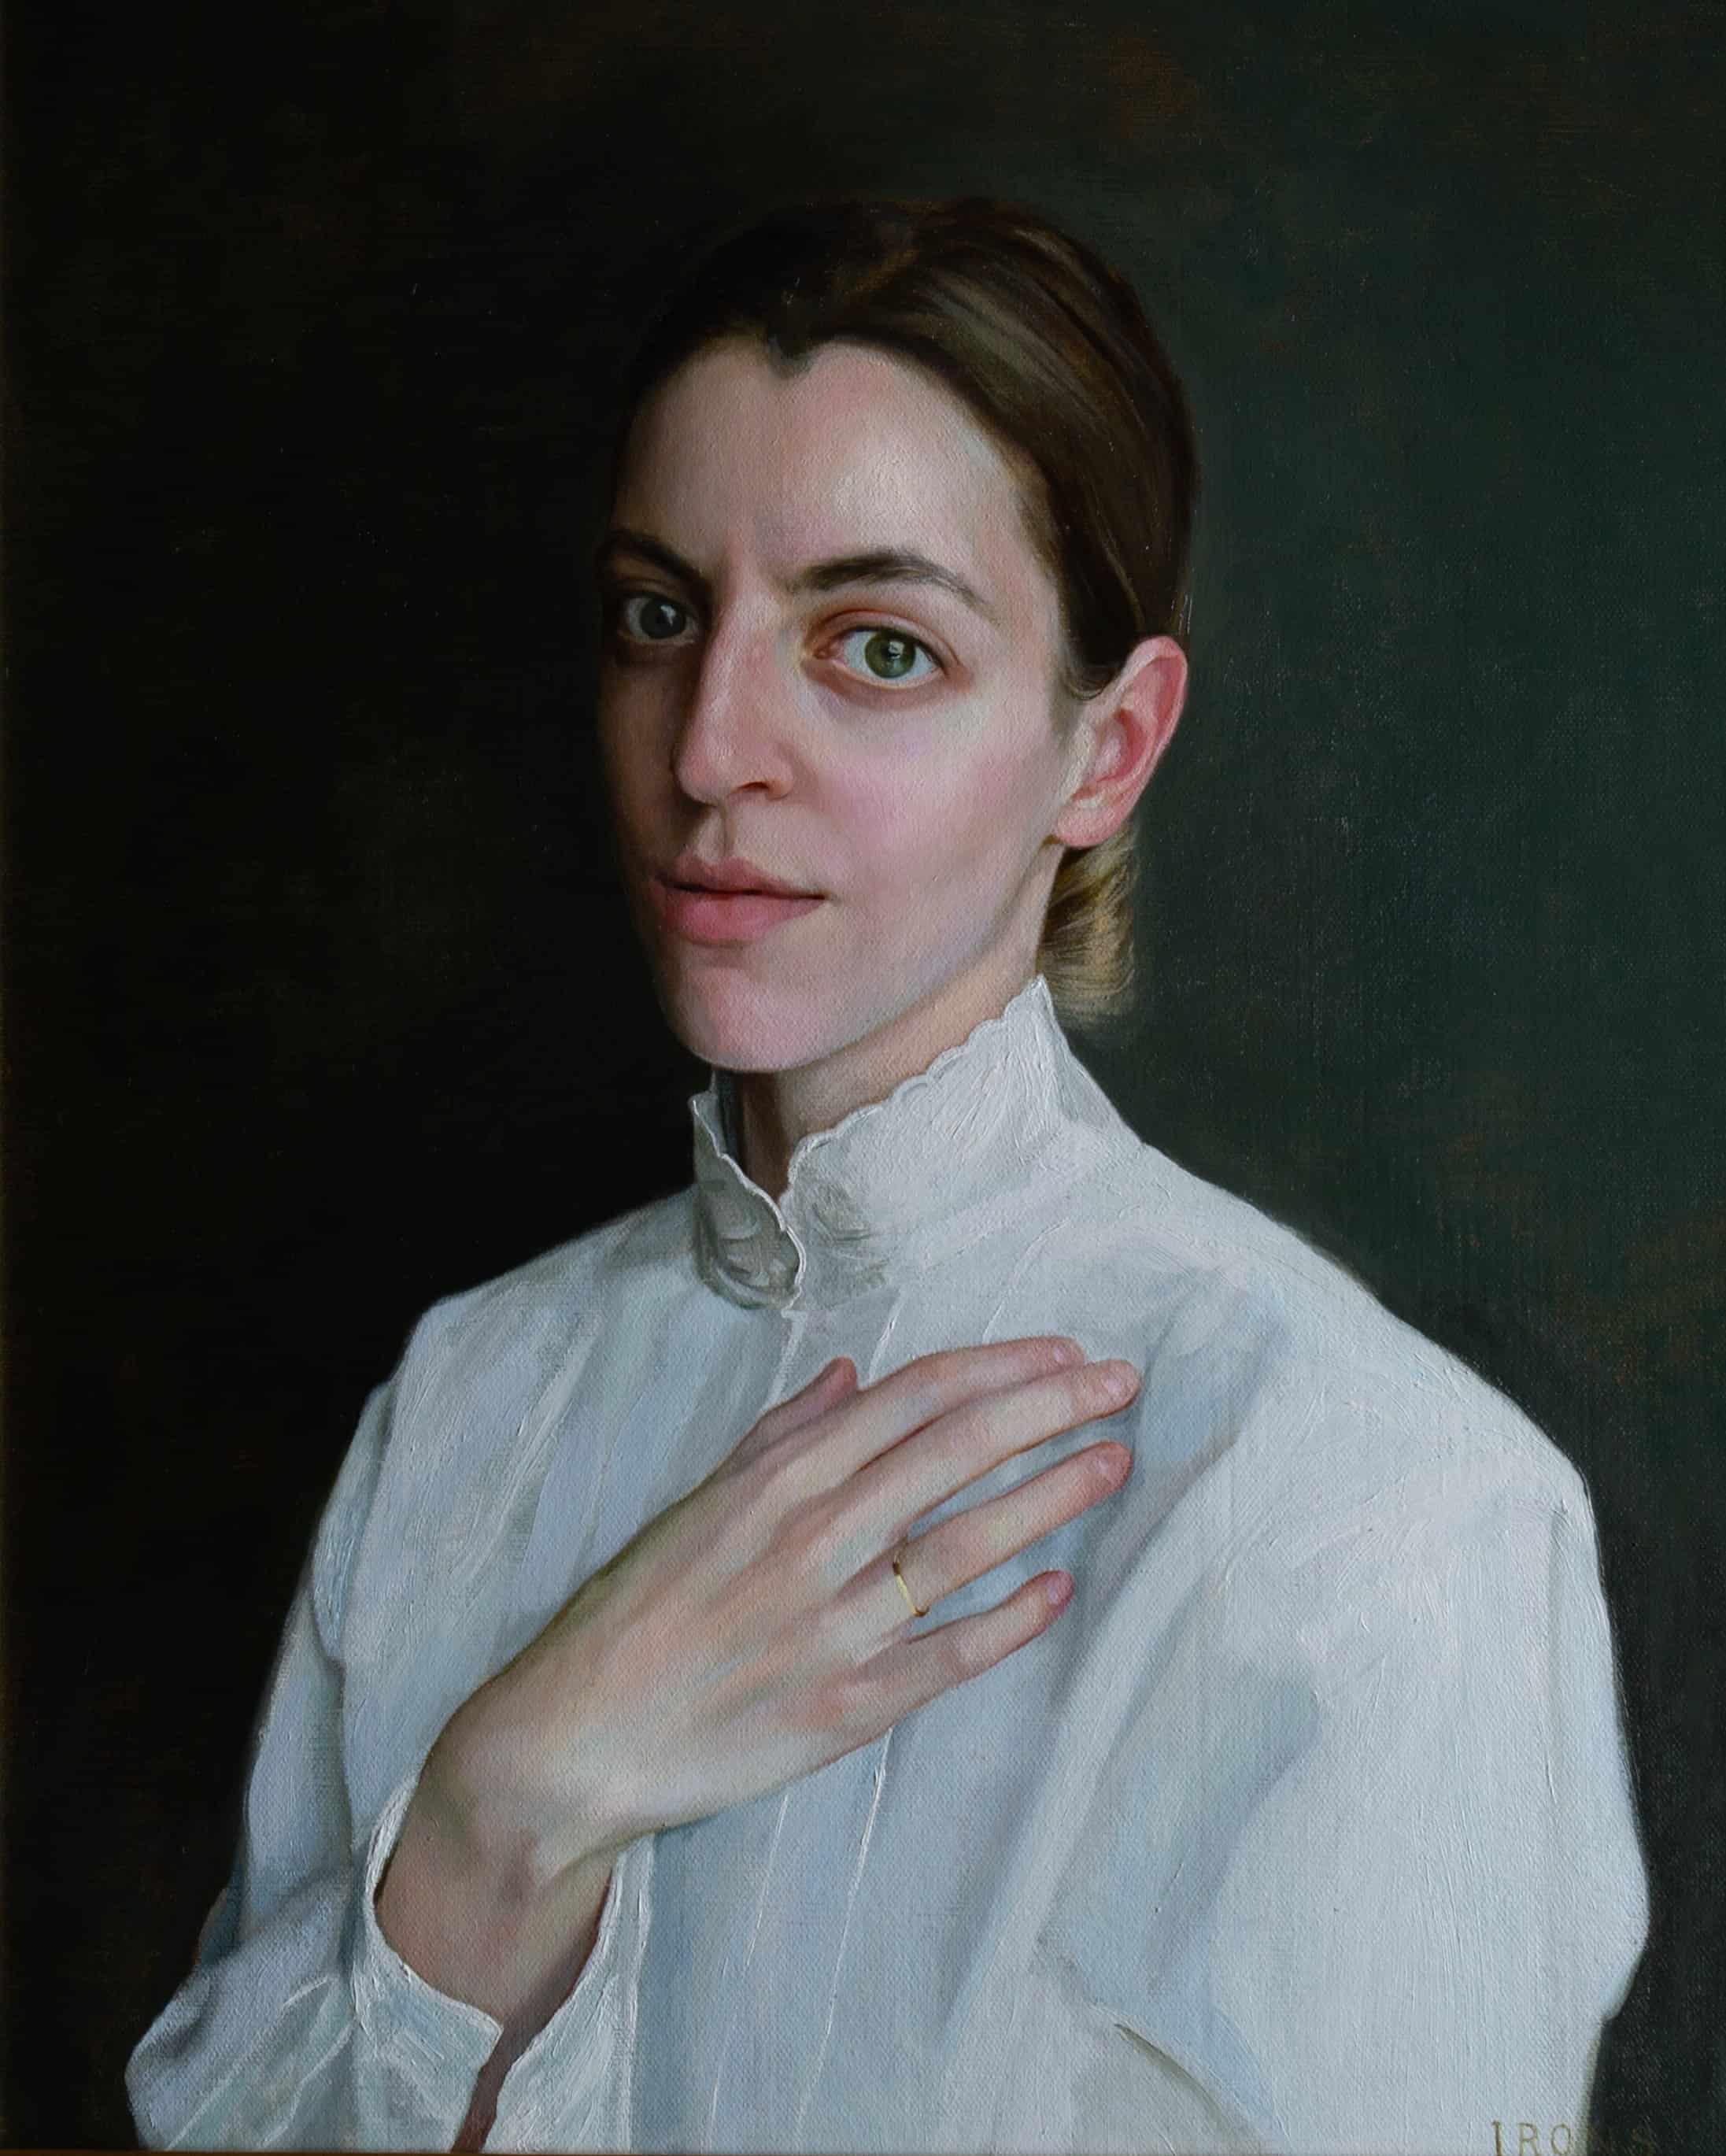 Self portrait of Morgan Irons with a white blouse and her hand on her chest